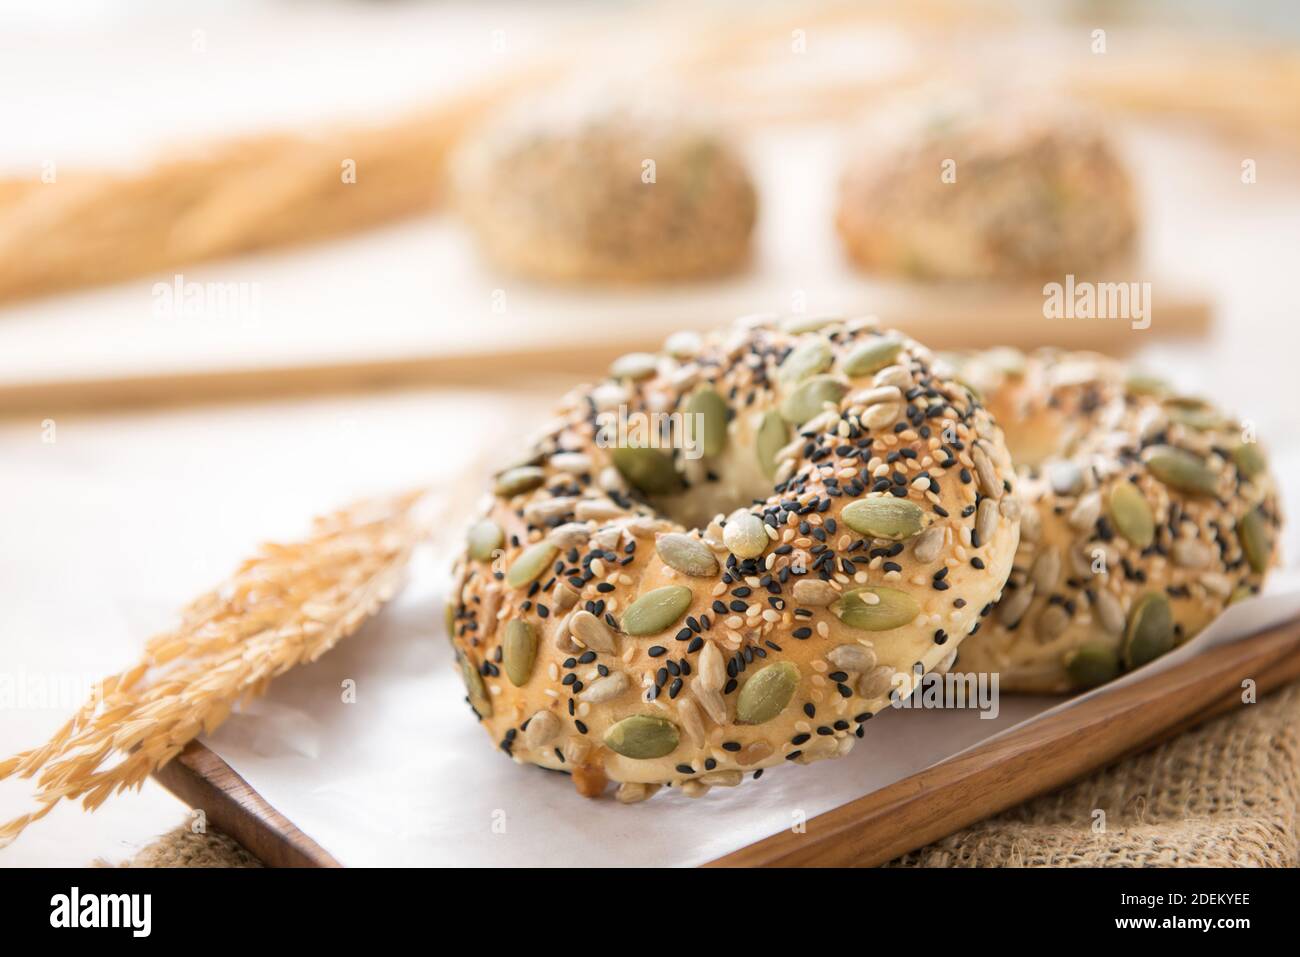 A healthy oven baked multigrain doughnut buns served on a wooden plate in a bakery Stock Photo